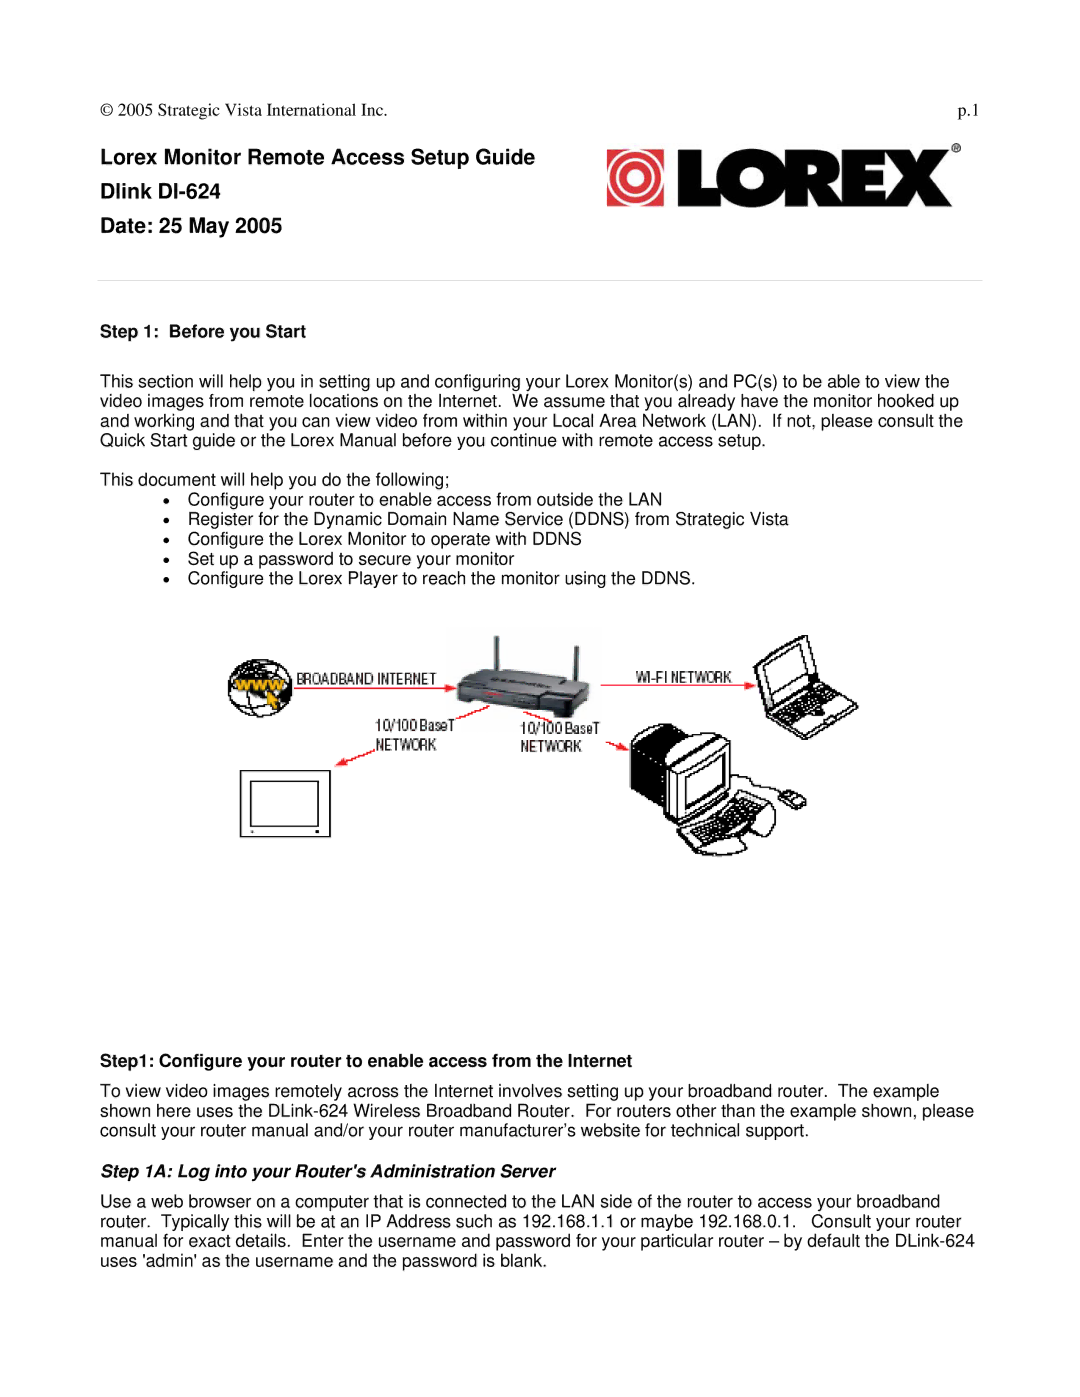 LOREX Technology DI-624 setup guide Before you Start, Configure your router to enable access from the Internet 